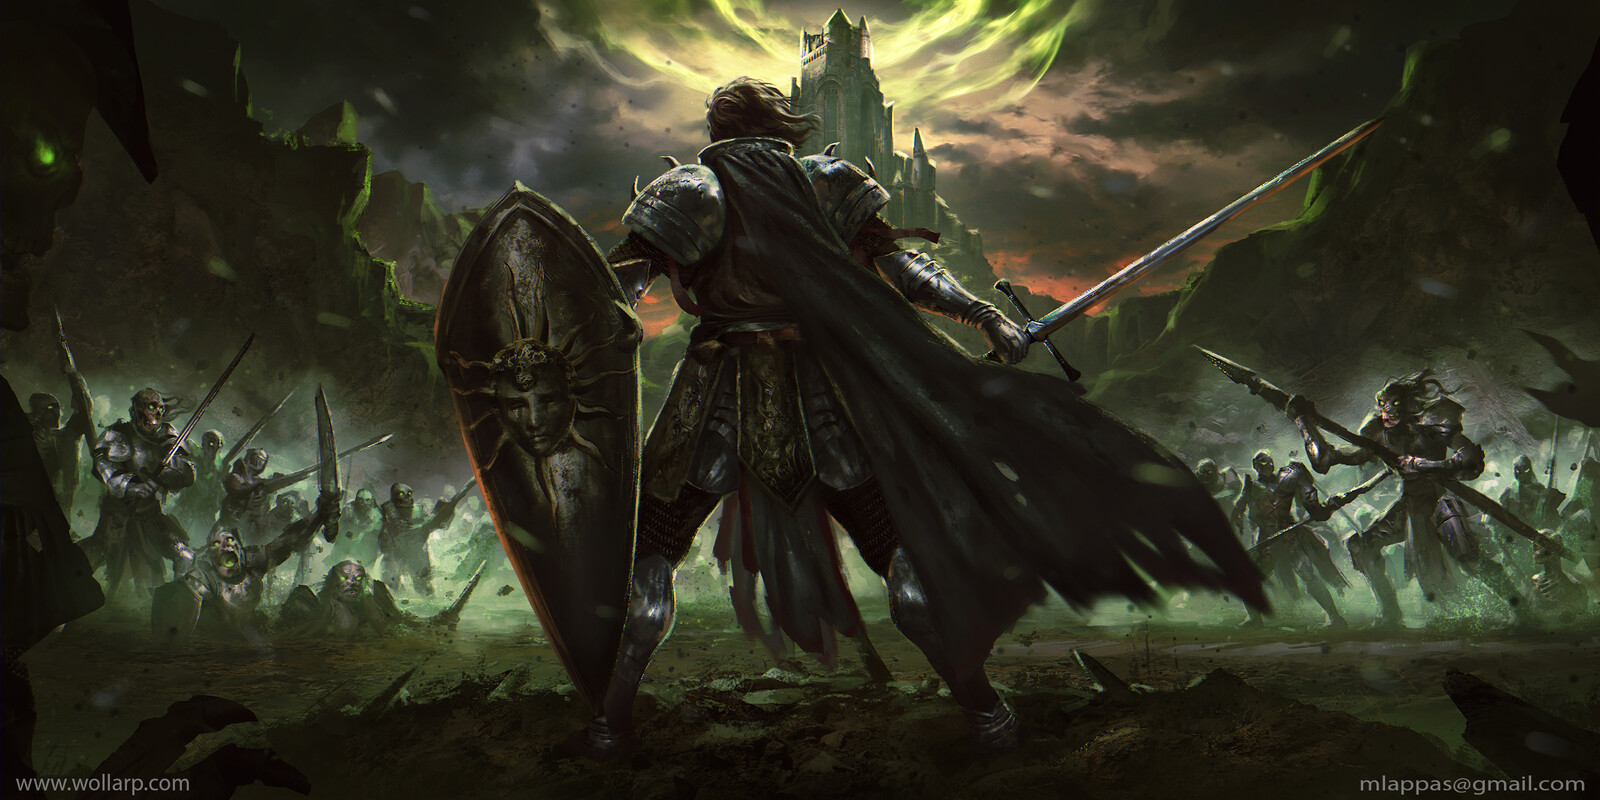 Sir Roland and the Undead Horde "Warriors of Light" 